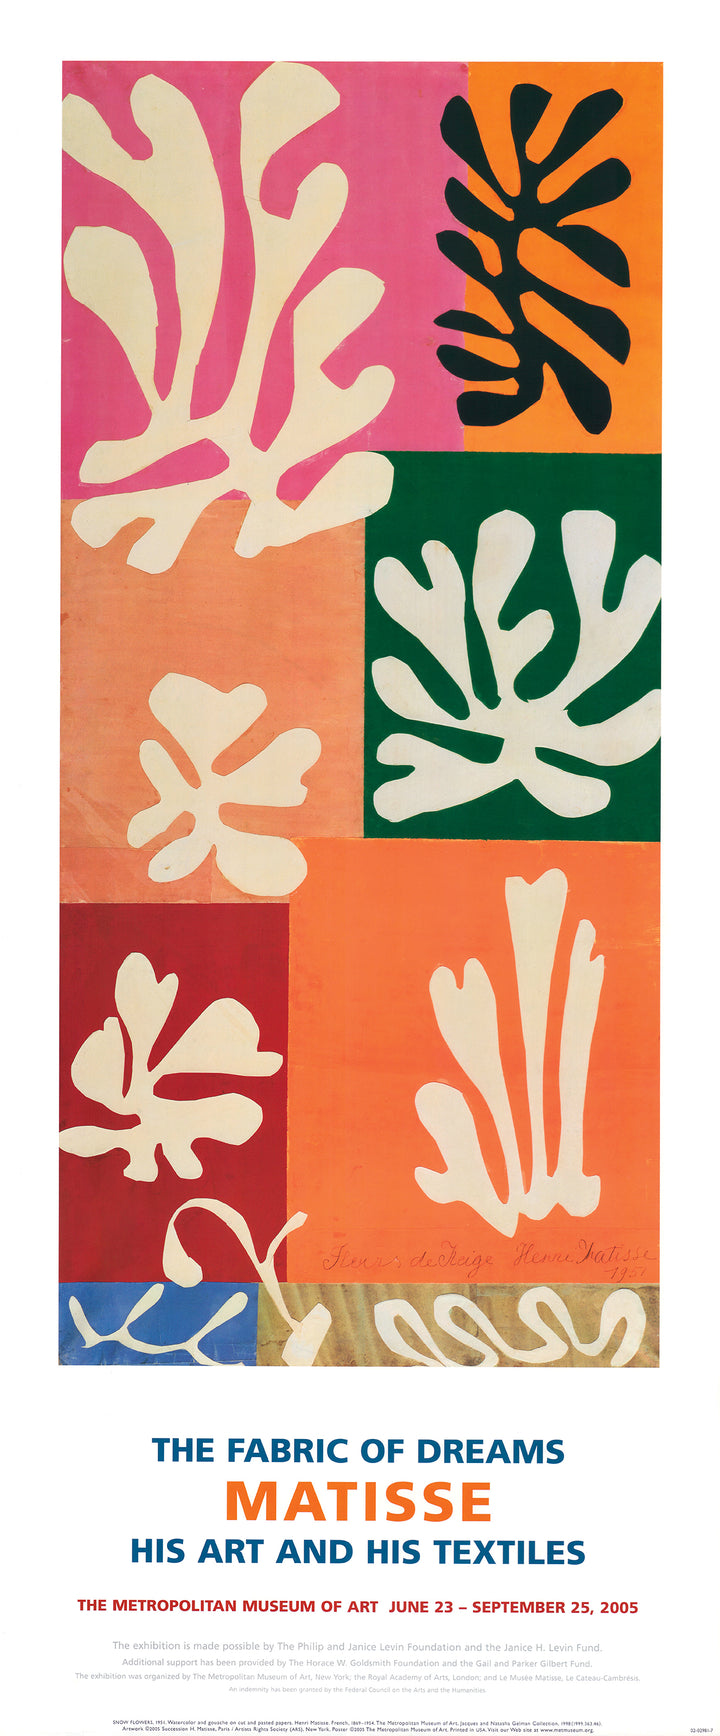 Snow Flowers, 1951 by Henri Matisse - 17 X 41 Inches (Art Print)